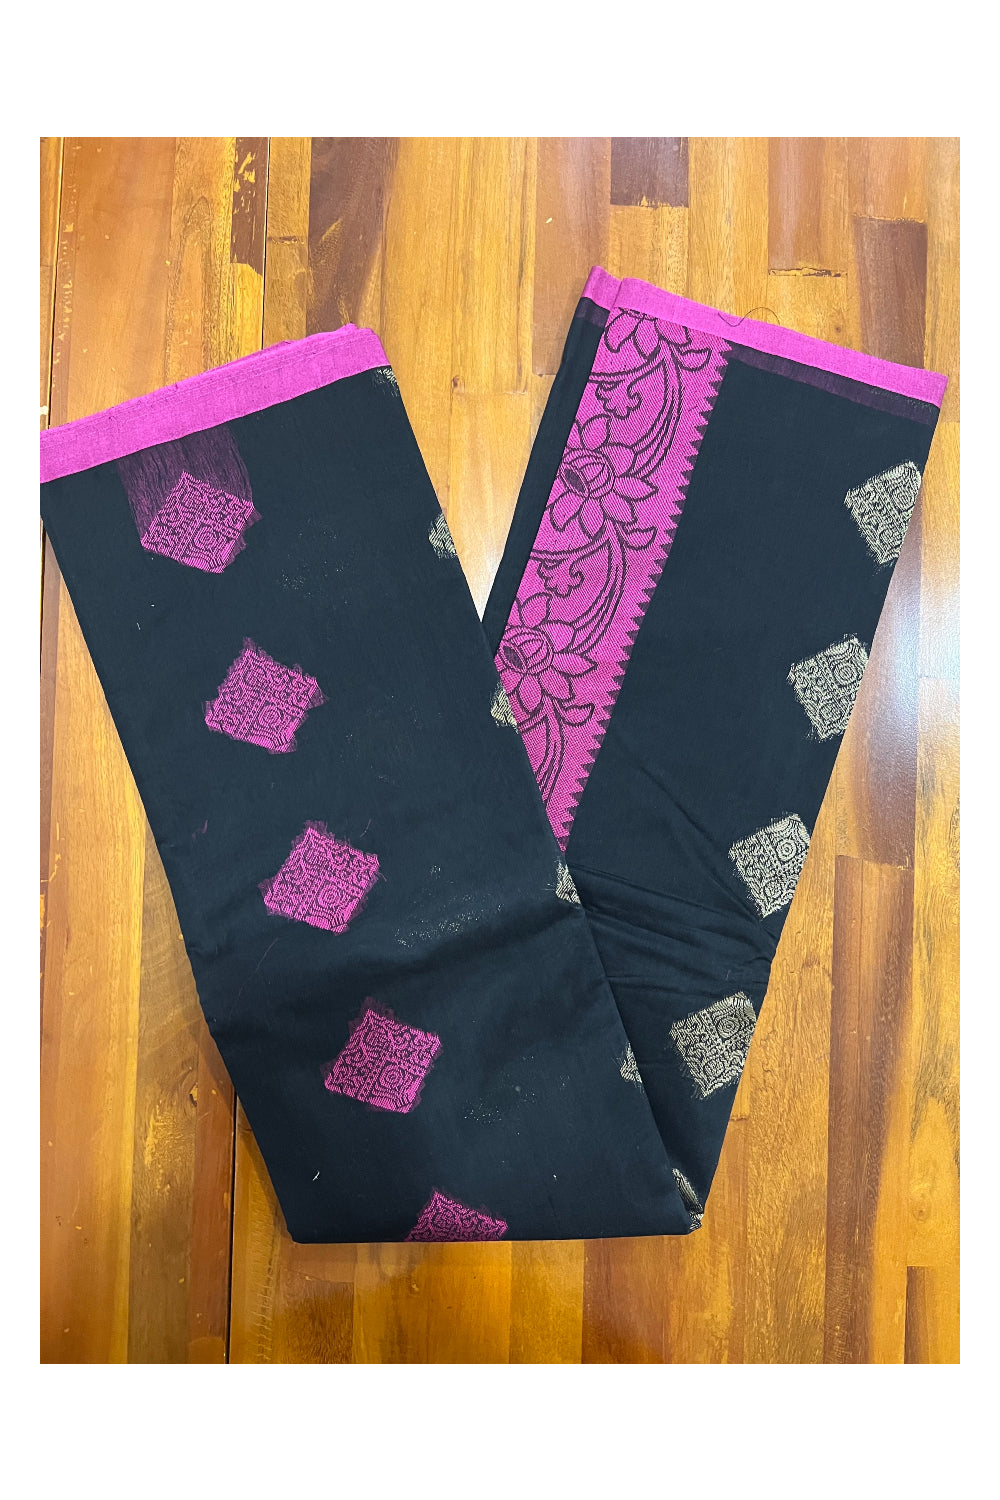 Southloom Black Cotton Designer Saree with Magenta and Zari Woven Patterns